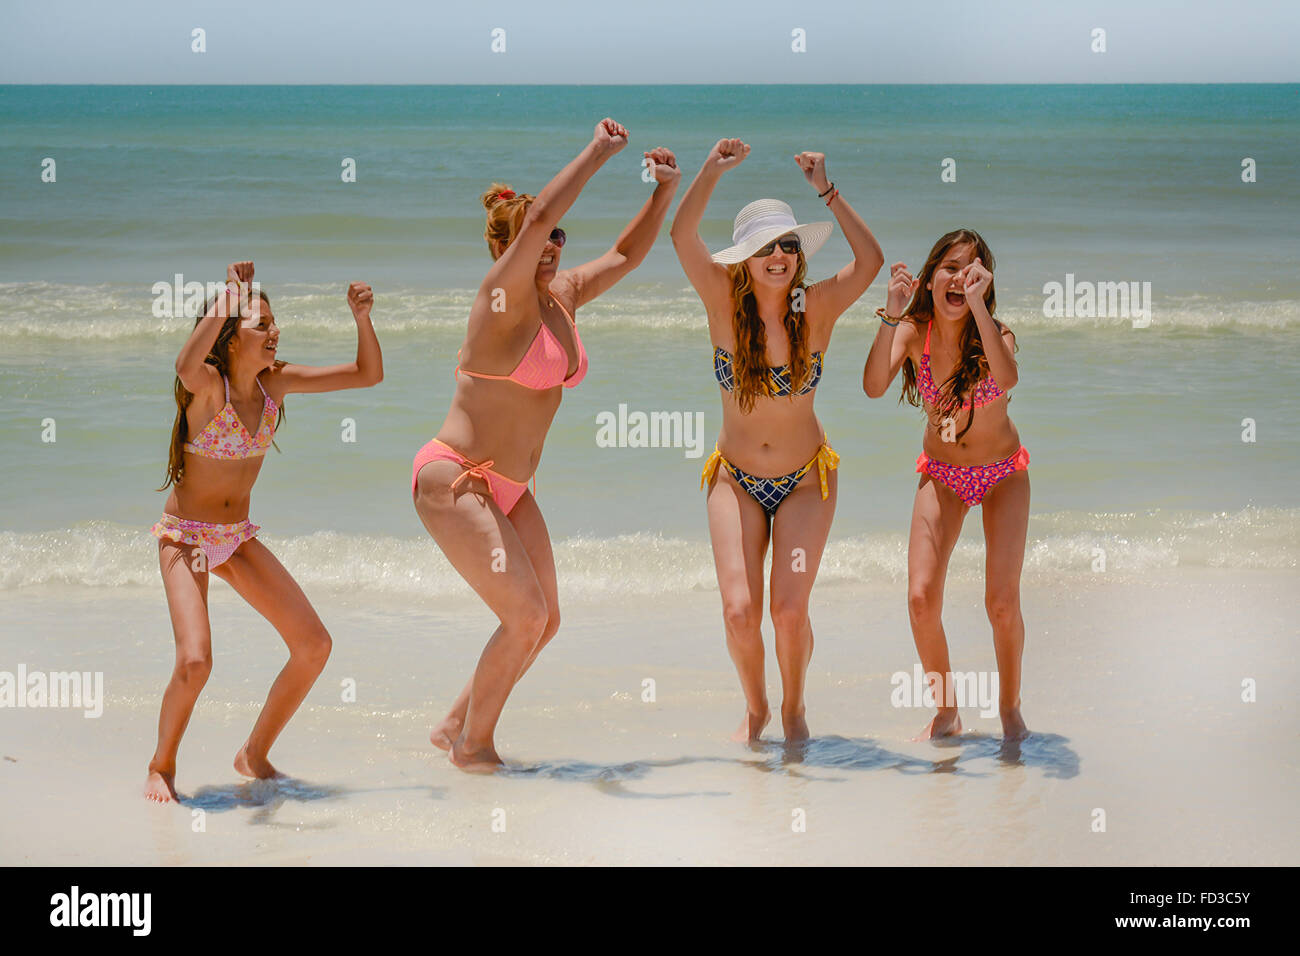 Four jubilant women in bikinis celebrate with laughter and exuberance in the surf at the beach Stock Photo